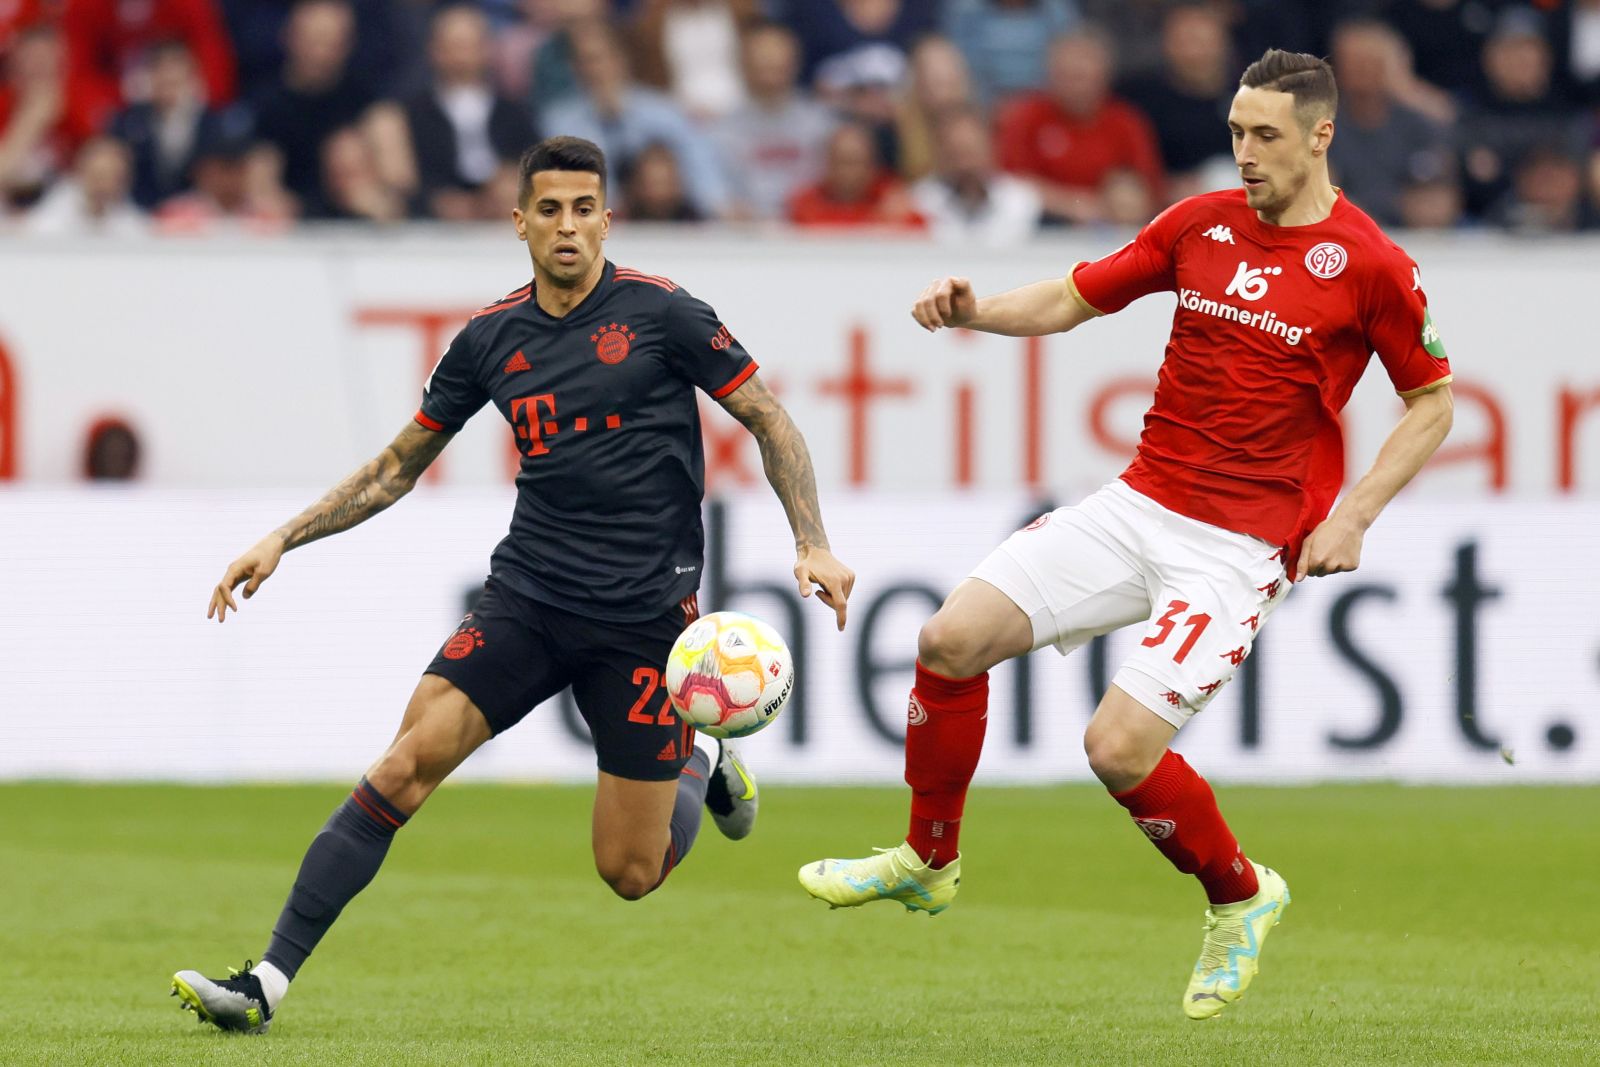 epa10585693 Munich's Joao Cancelo (L) in action against Mainz’s Dominik Kohr (R) during the German Bundesliga soccer match between 1. FSV Mainz 05 and FC Bayern Munich in Mainz, Germany, 22 April 2023.  EPA/RONALD WITTEK CONDITIONS - ATTENTION: The DFL regulations prohibit any use of photographs as image sequences and/or quasi-video.